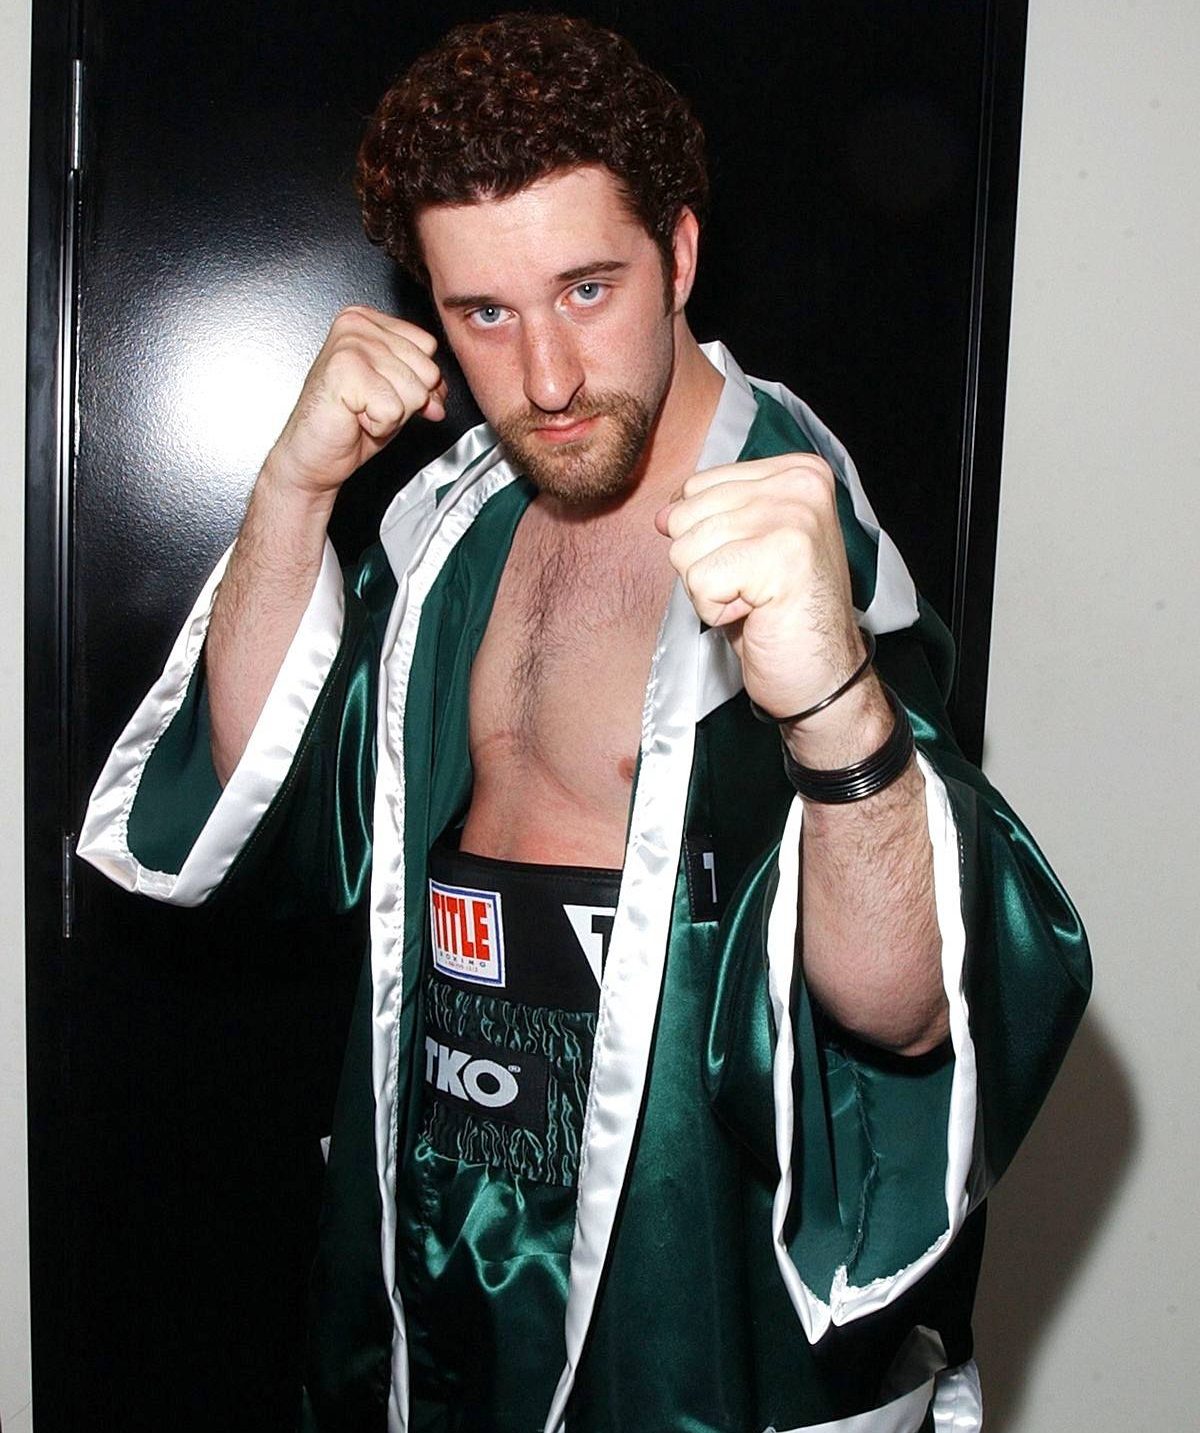 Dustin Diamond in boxing gown and shorts, celebrity boxing